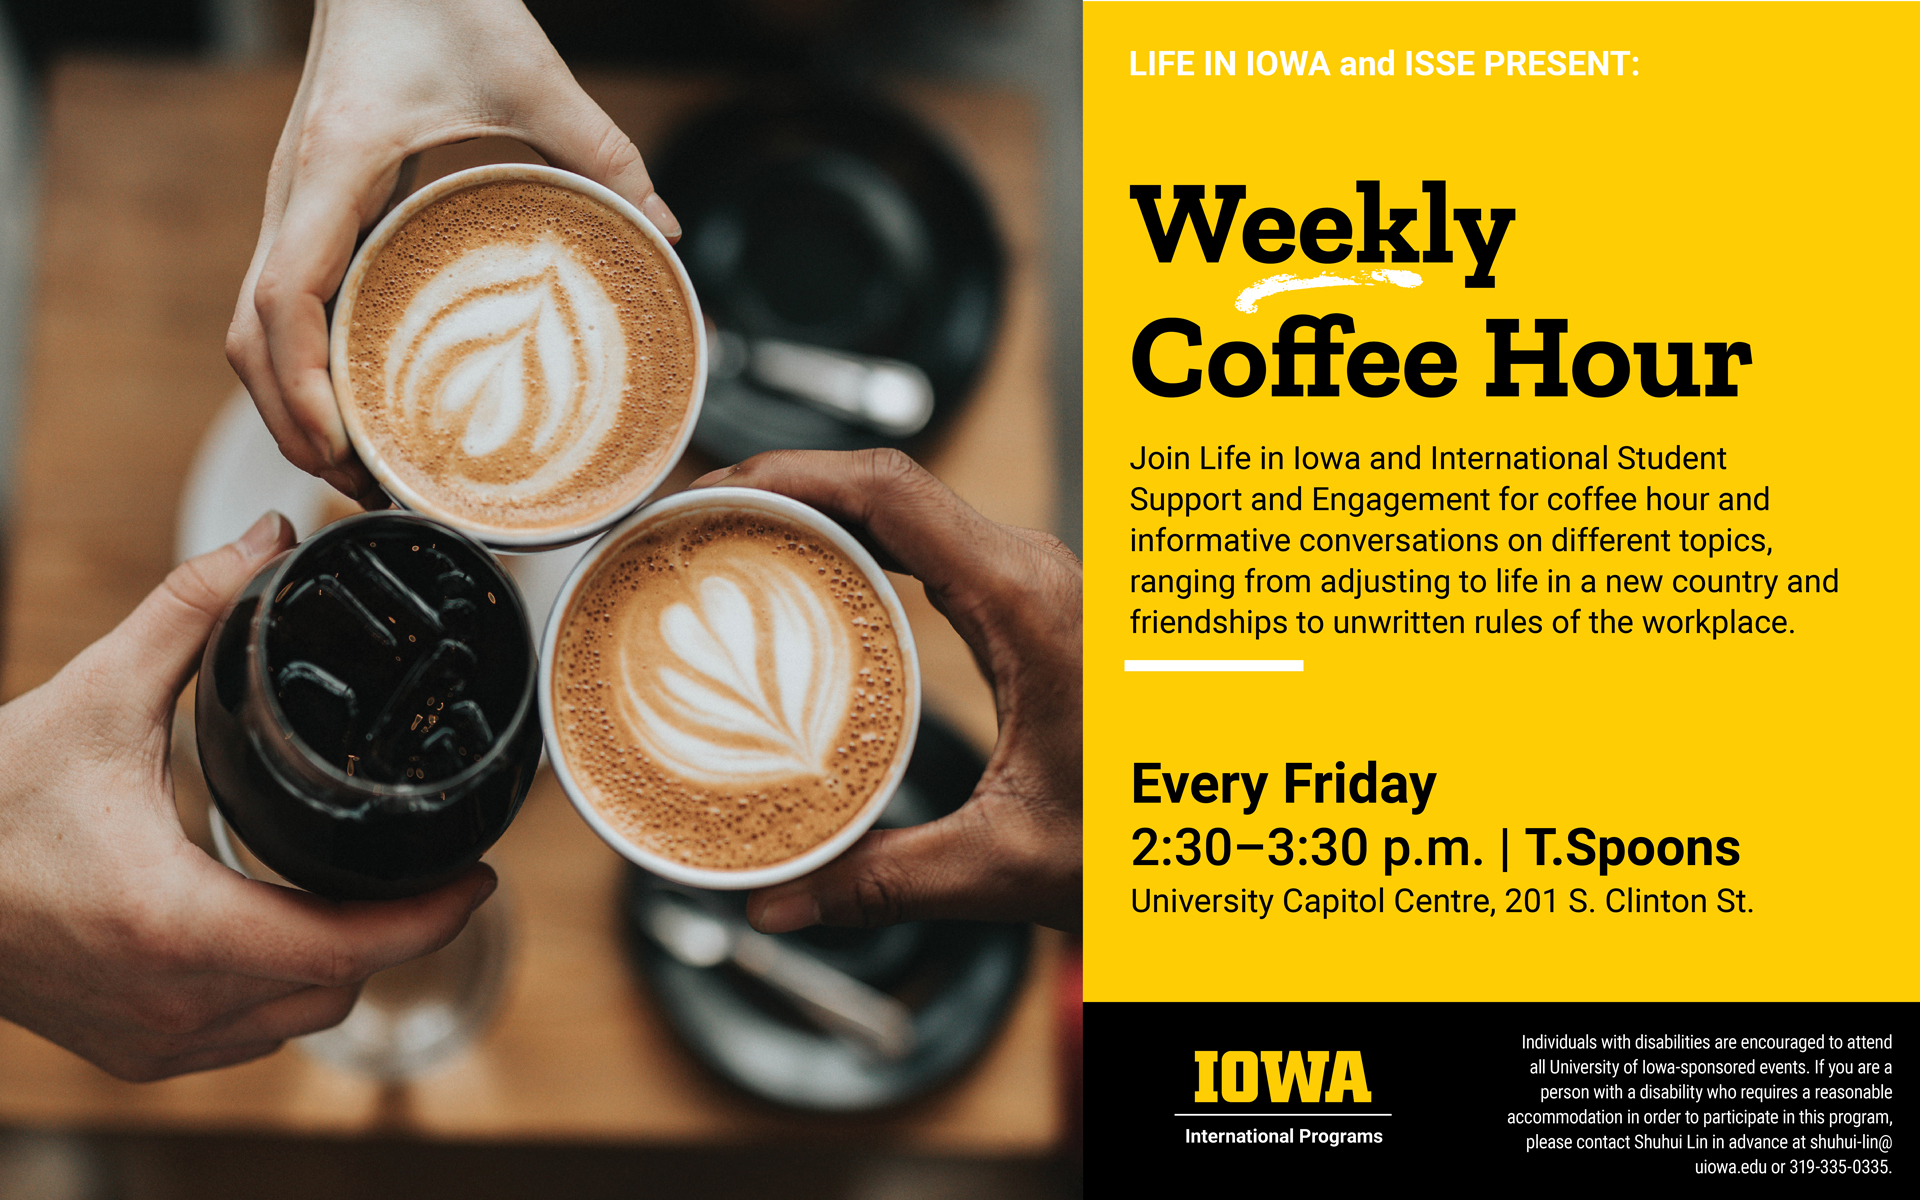 Life in Iowa and ISSE Present: Weekly Coffee Hour. Join Life in Iowa and International Student Support and Engagement for coffee hour and informative conversations on different topics, ranging from adjusting to life in a new country and friendships to unwritten rules of the workplace. Every Friday, 2:30-3:30 p.m., T. Spoons, University Capitol Centre, 201 S. Clinton Street. Individuals with disabilities are encouraged to attend all University of Iowa-sponsored events. If you are a person with a disability who requires a reasonable accommodation in order to participate in this program, please contact Shuhui Lin in advance at shuhui-lin@uiowa.edu or 319-335-0335. 